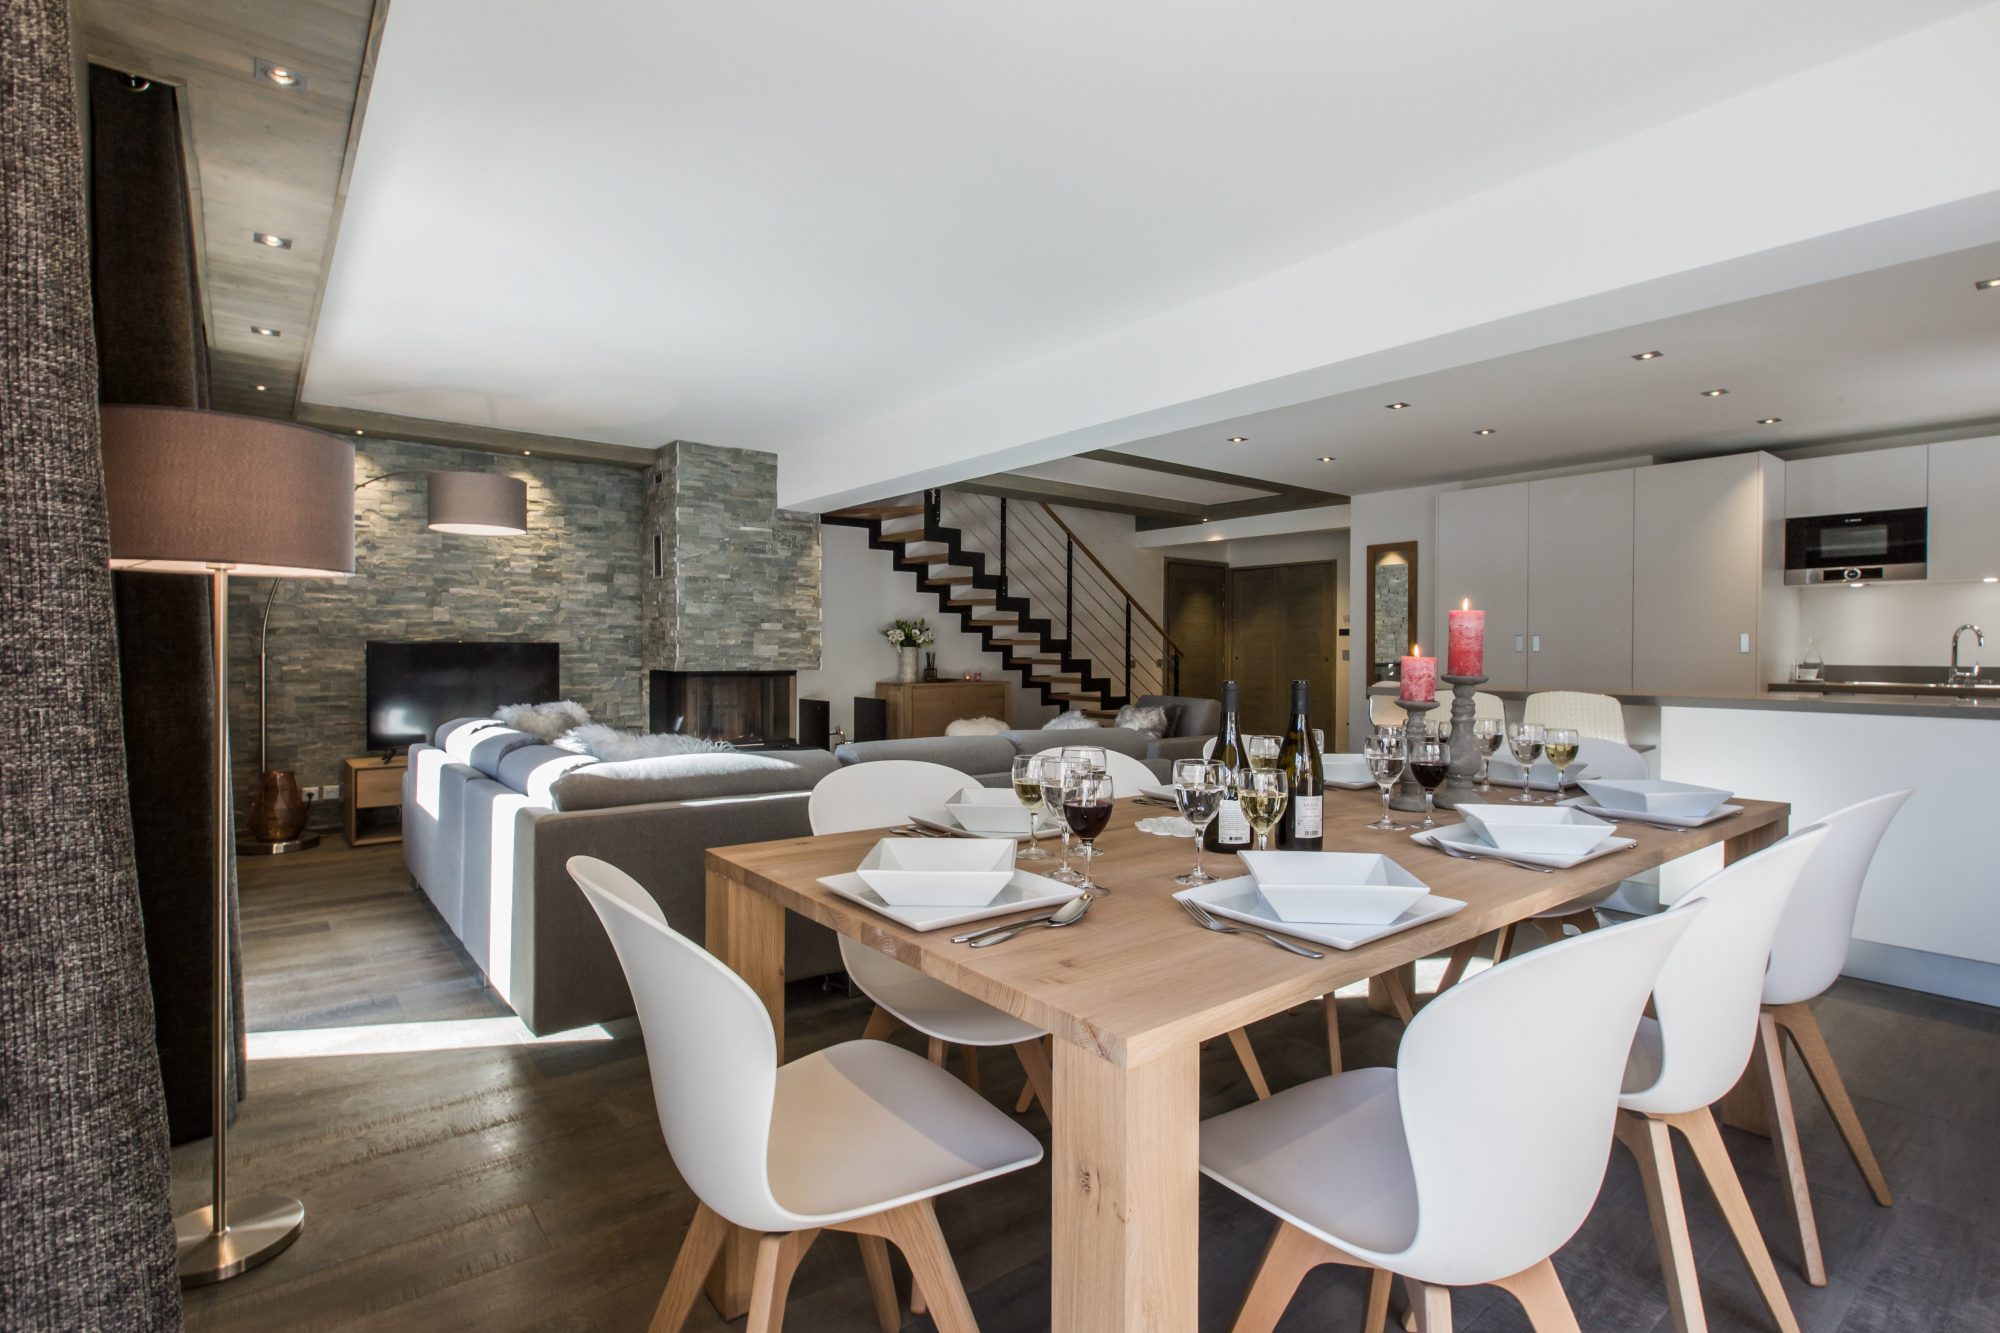 Affordable Luxury in Courchevel